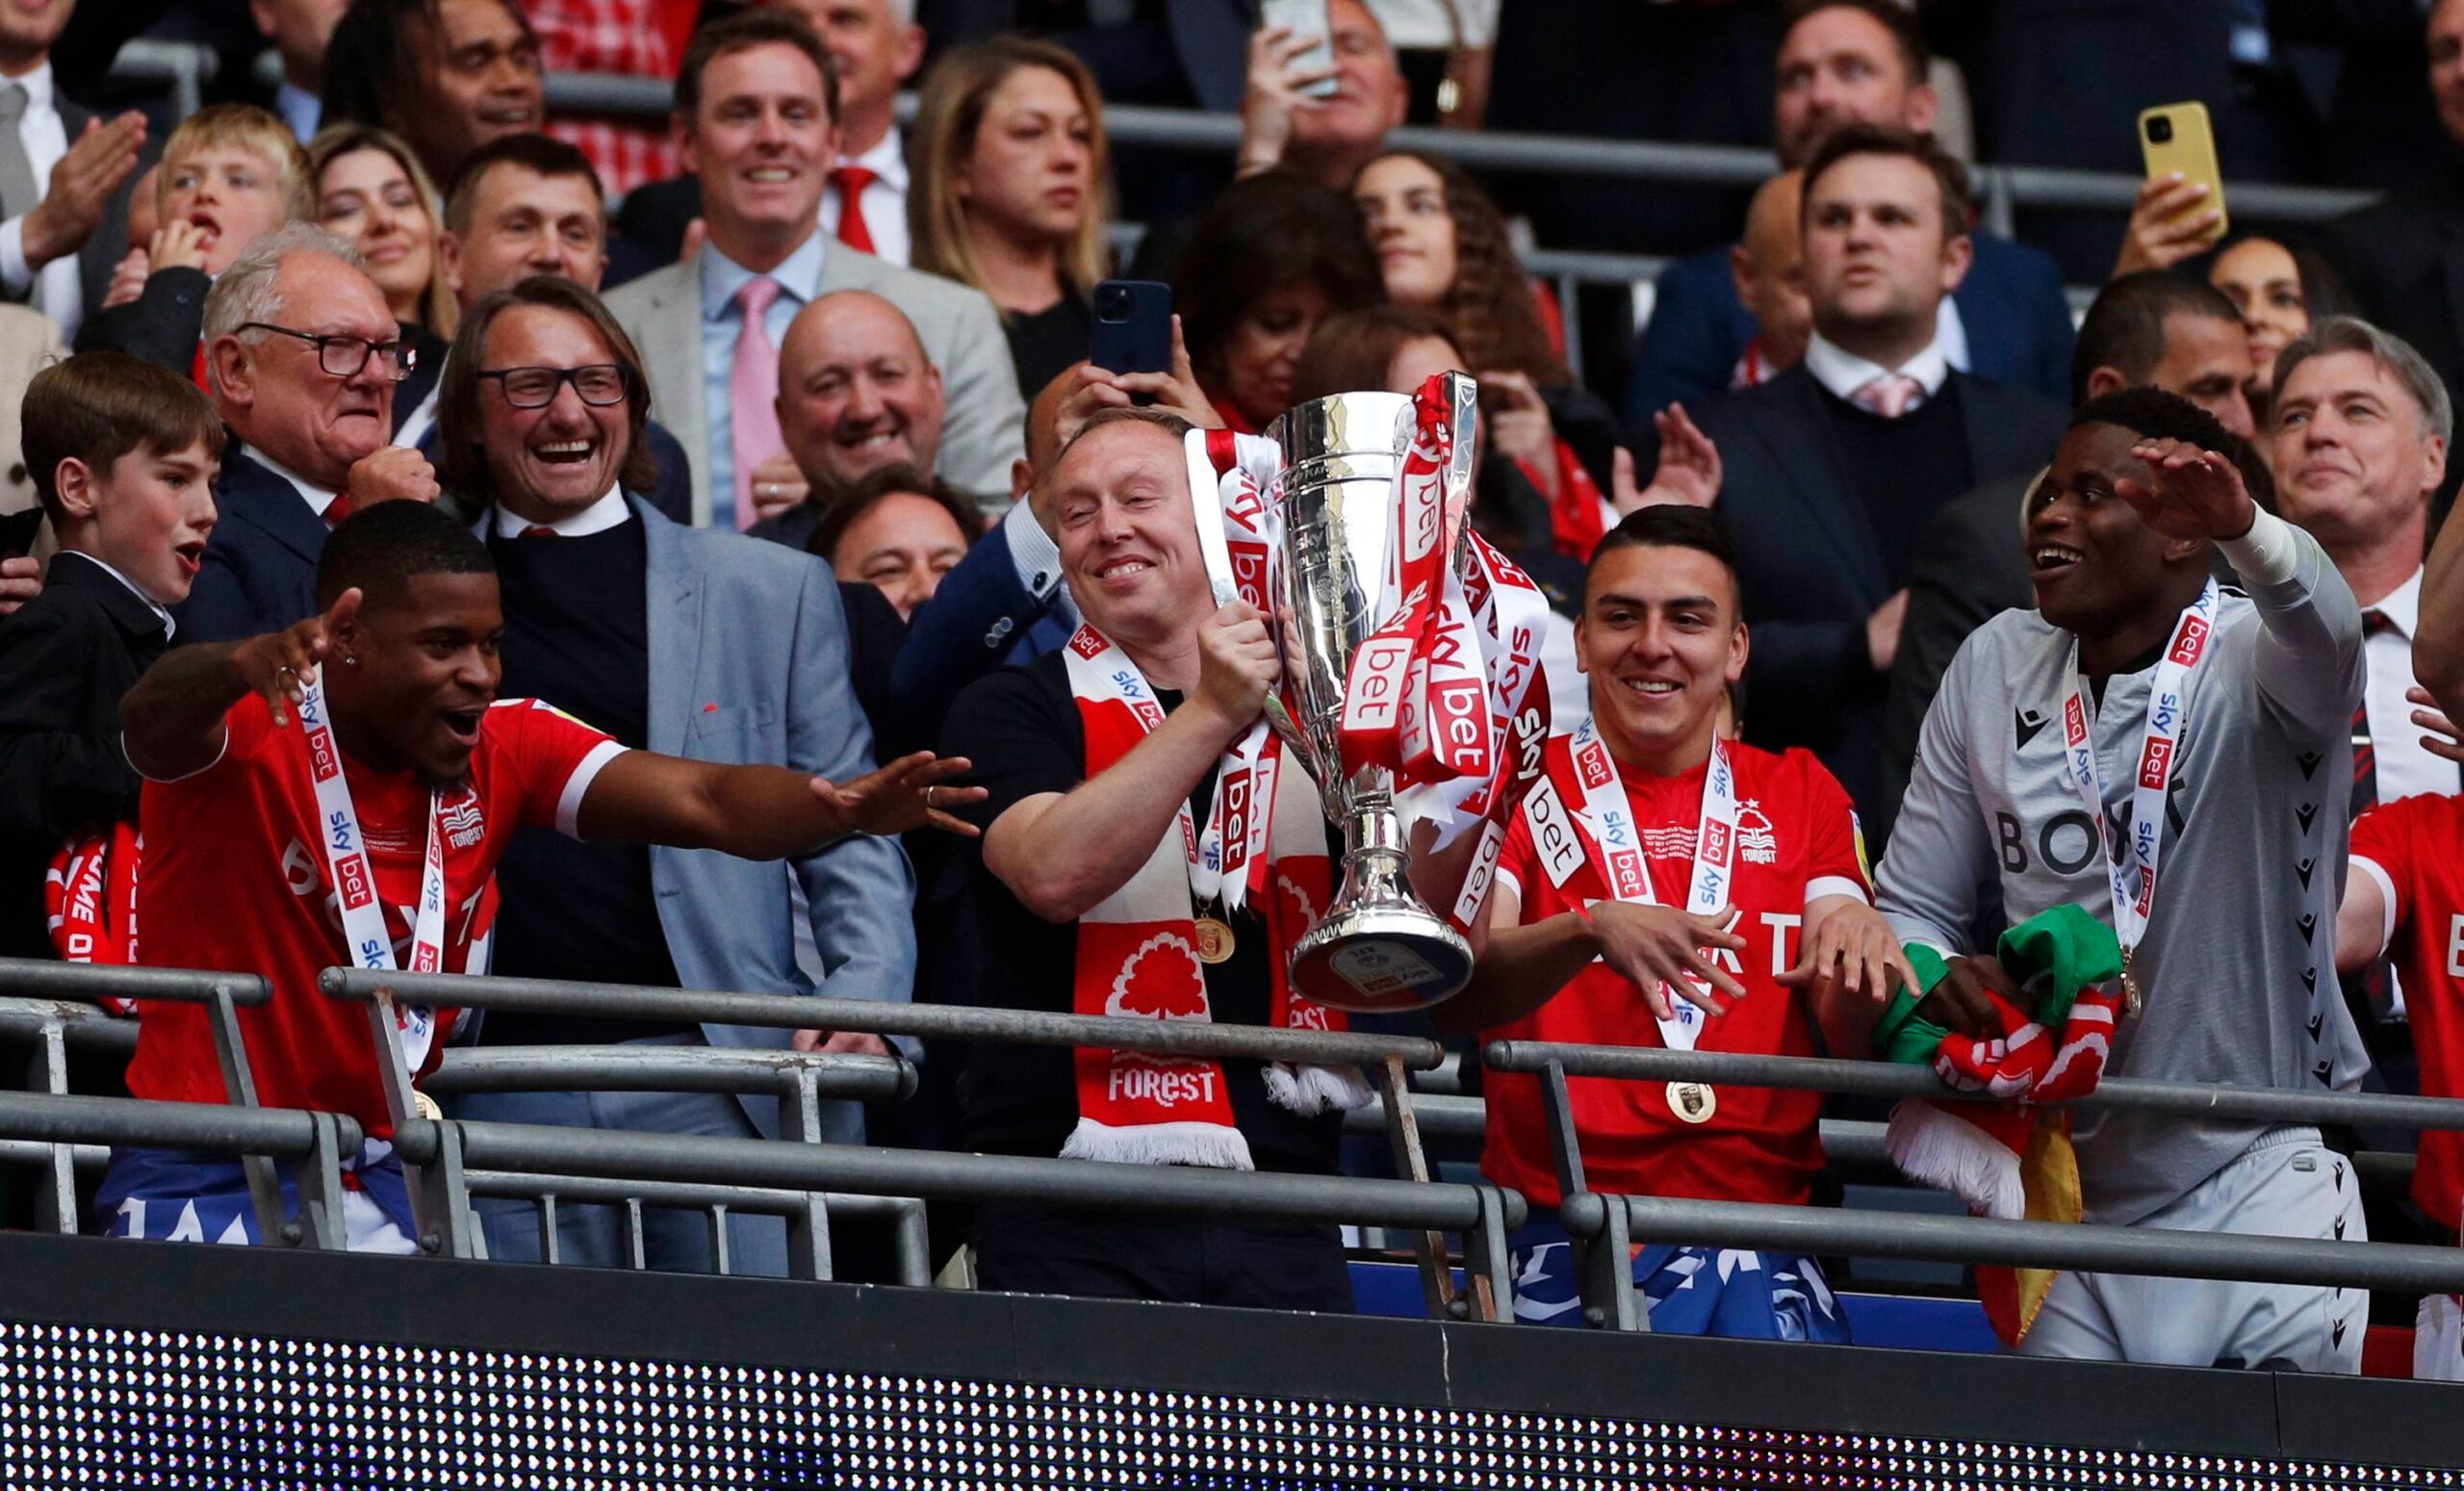 Soccer Football - Championship Play-Off Final - Huddersfield Town v Nottingham Forest - Wembley Stadium, London, Britain - May 29, 2022 Nottingham Forest manager Steve Cooper celebrates with the trophy after winning the Championship Play-Off Final Action Images via Reuters/Andrew Boyers